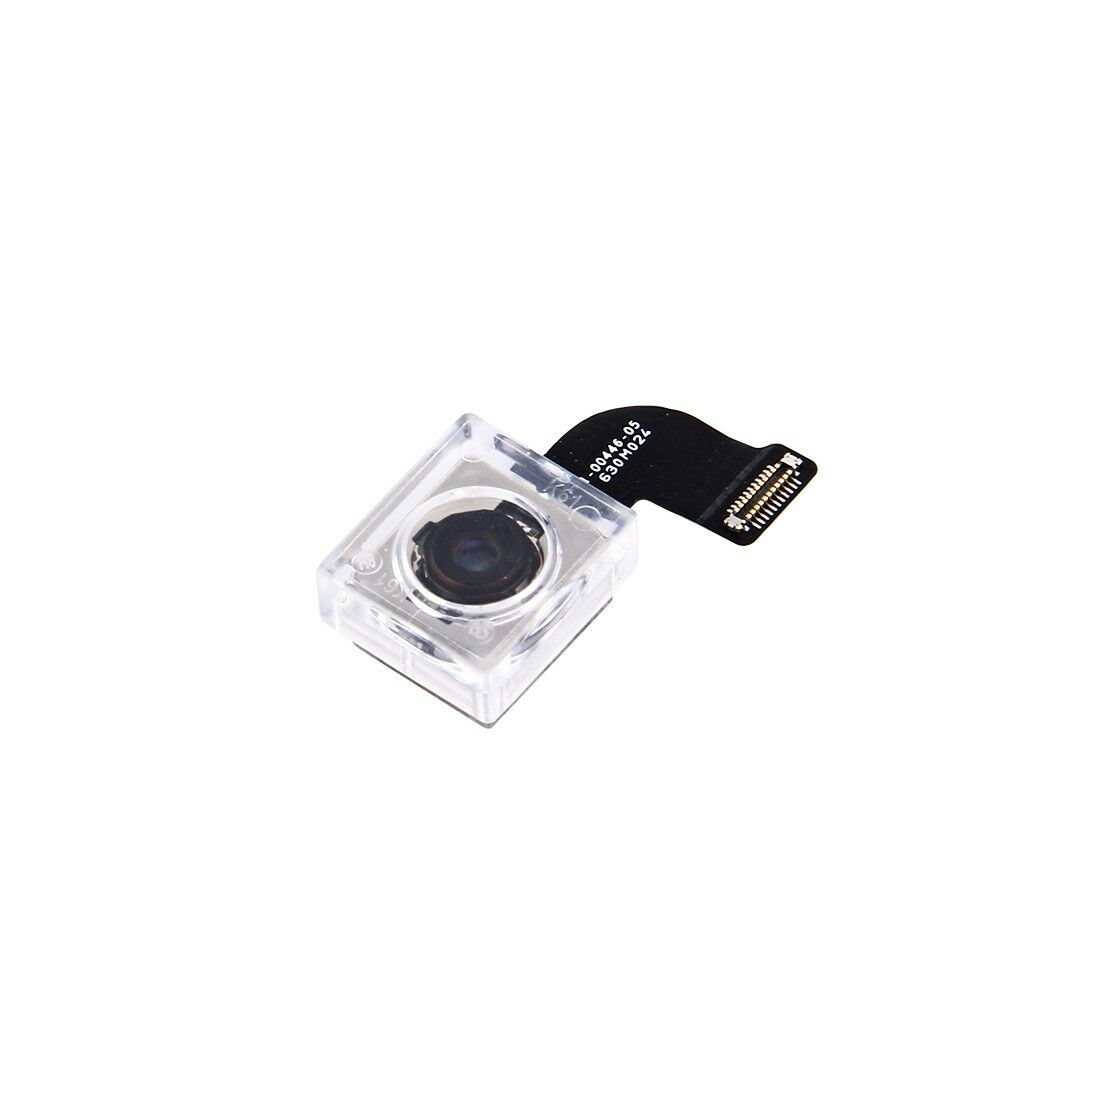 Apple iPhone 7 Genuine Rear Main Camera Lens Module Flex Cable for [product_price] - First Help Tech